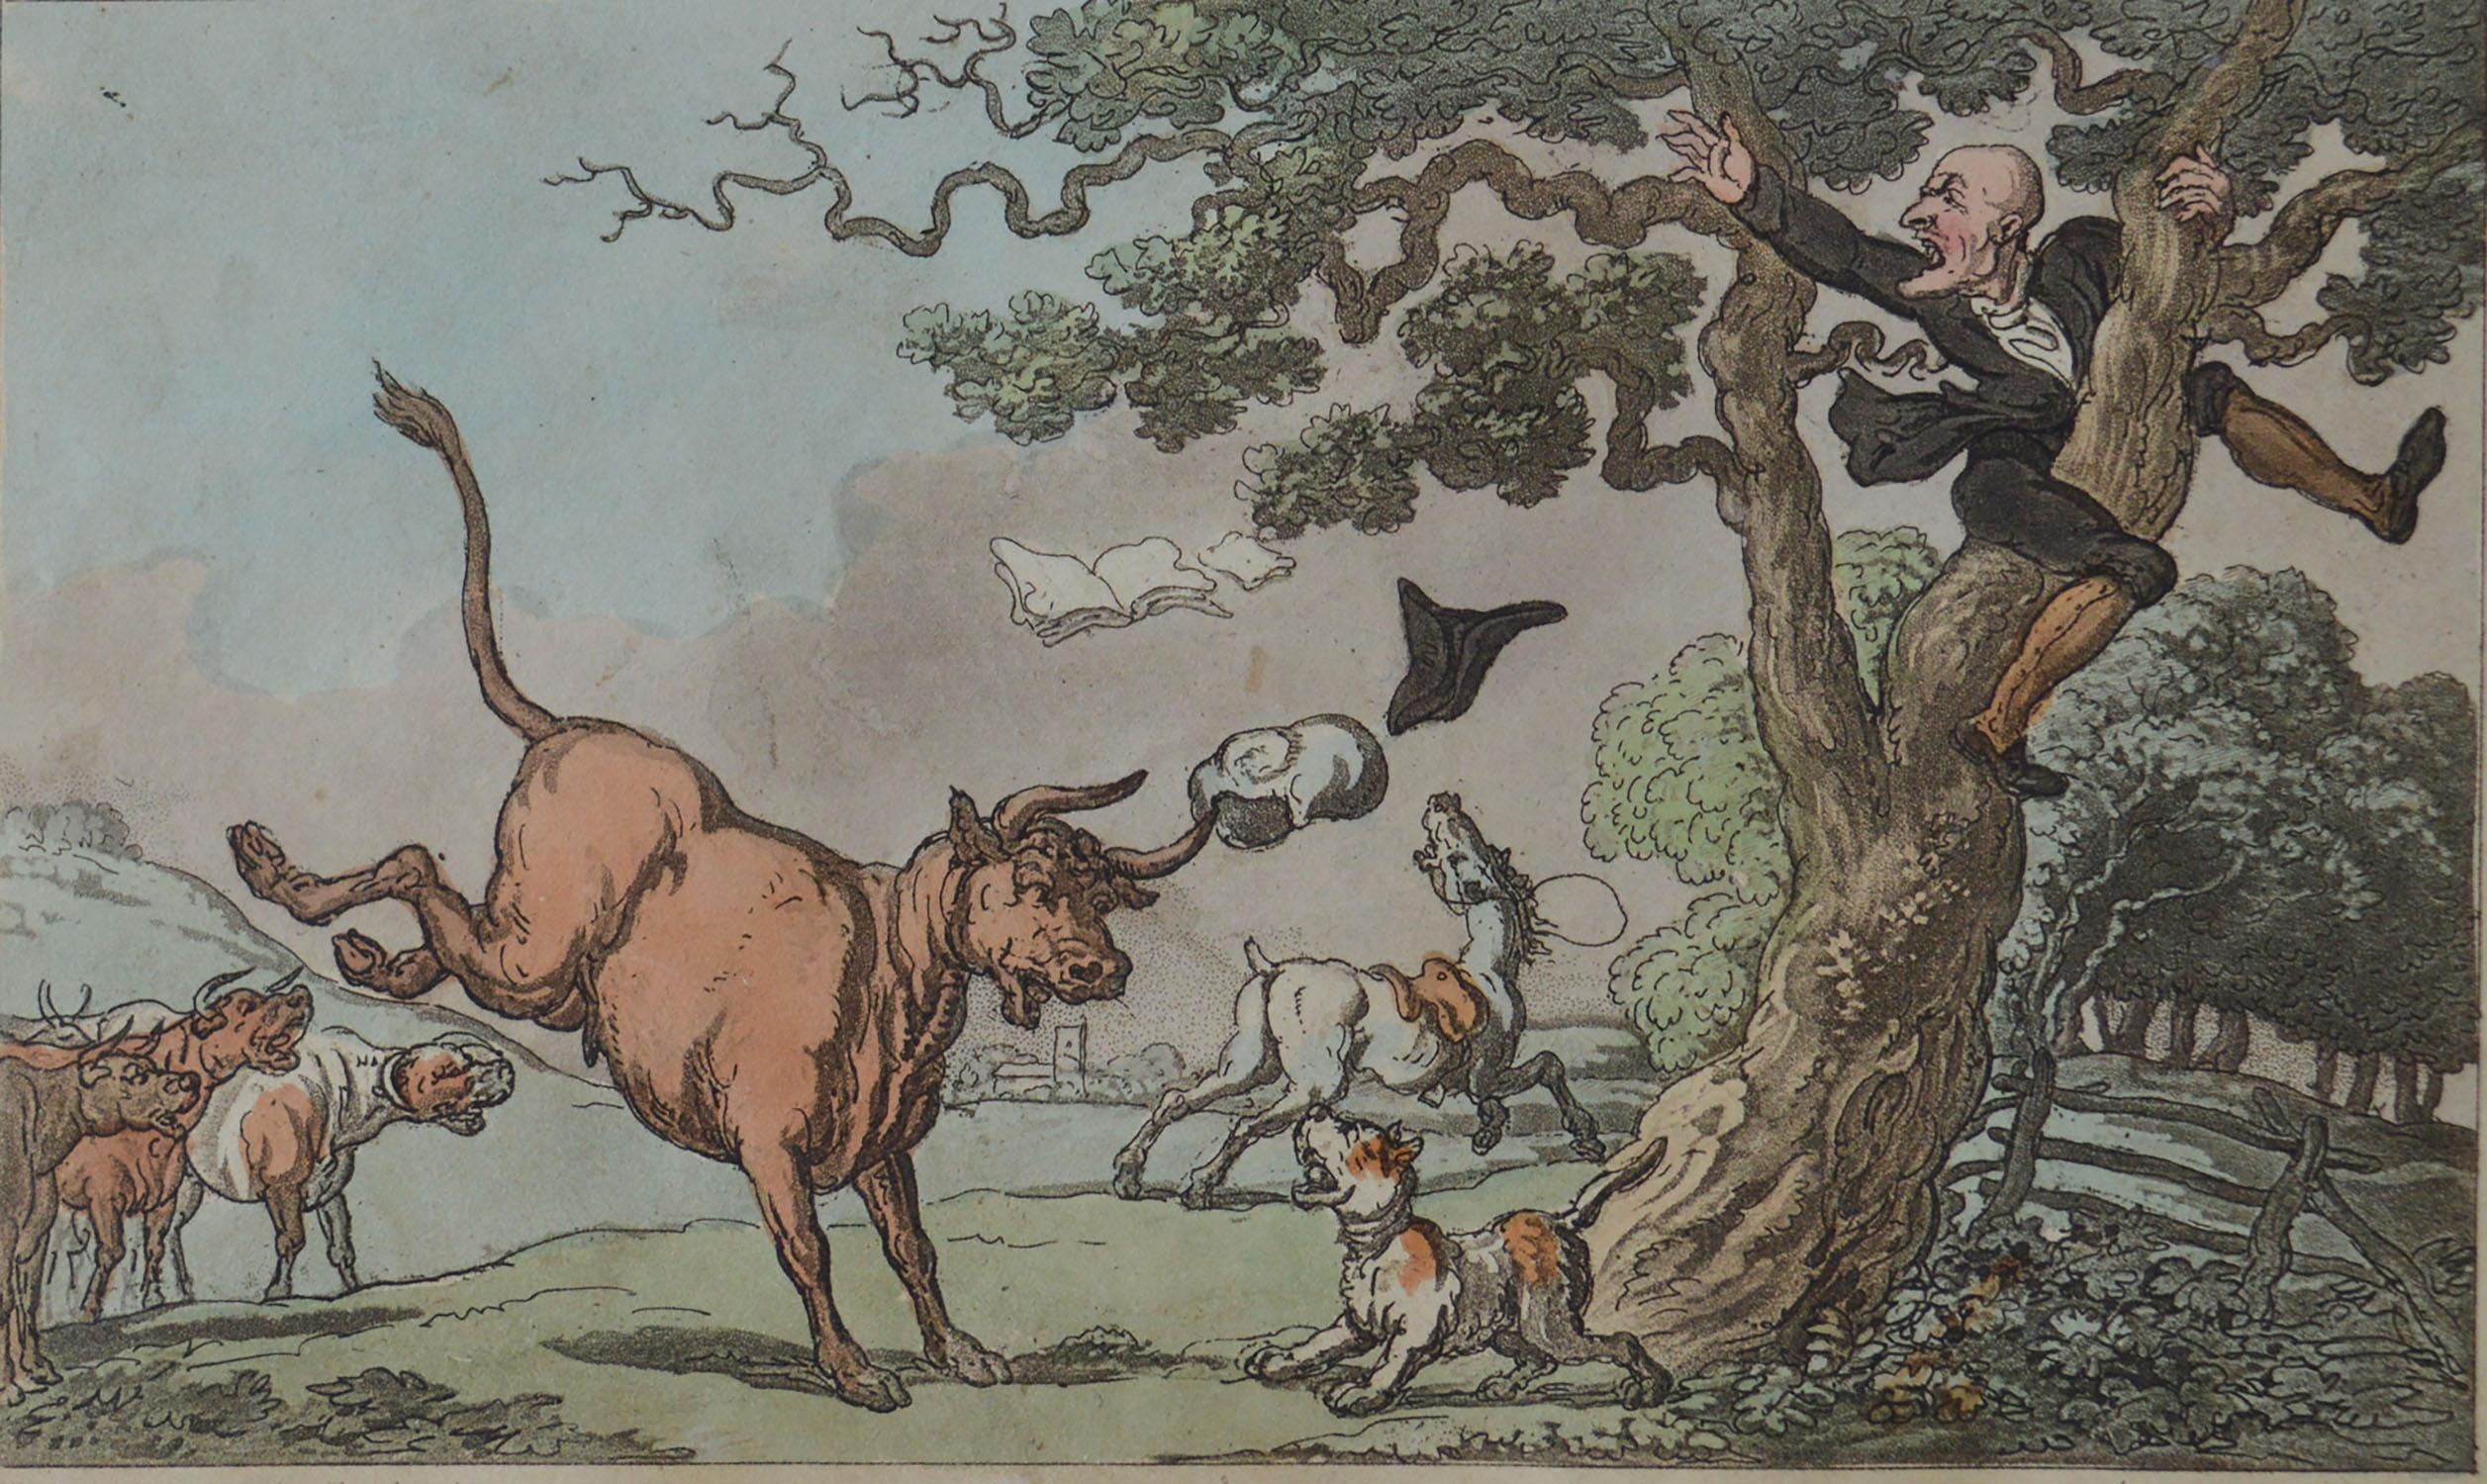 Great image by Thomas Rowlandson from the “Tour of Dr Syntax